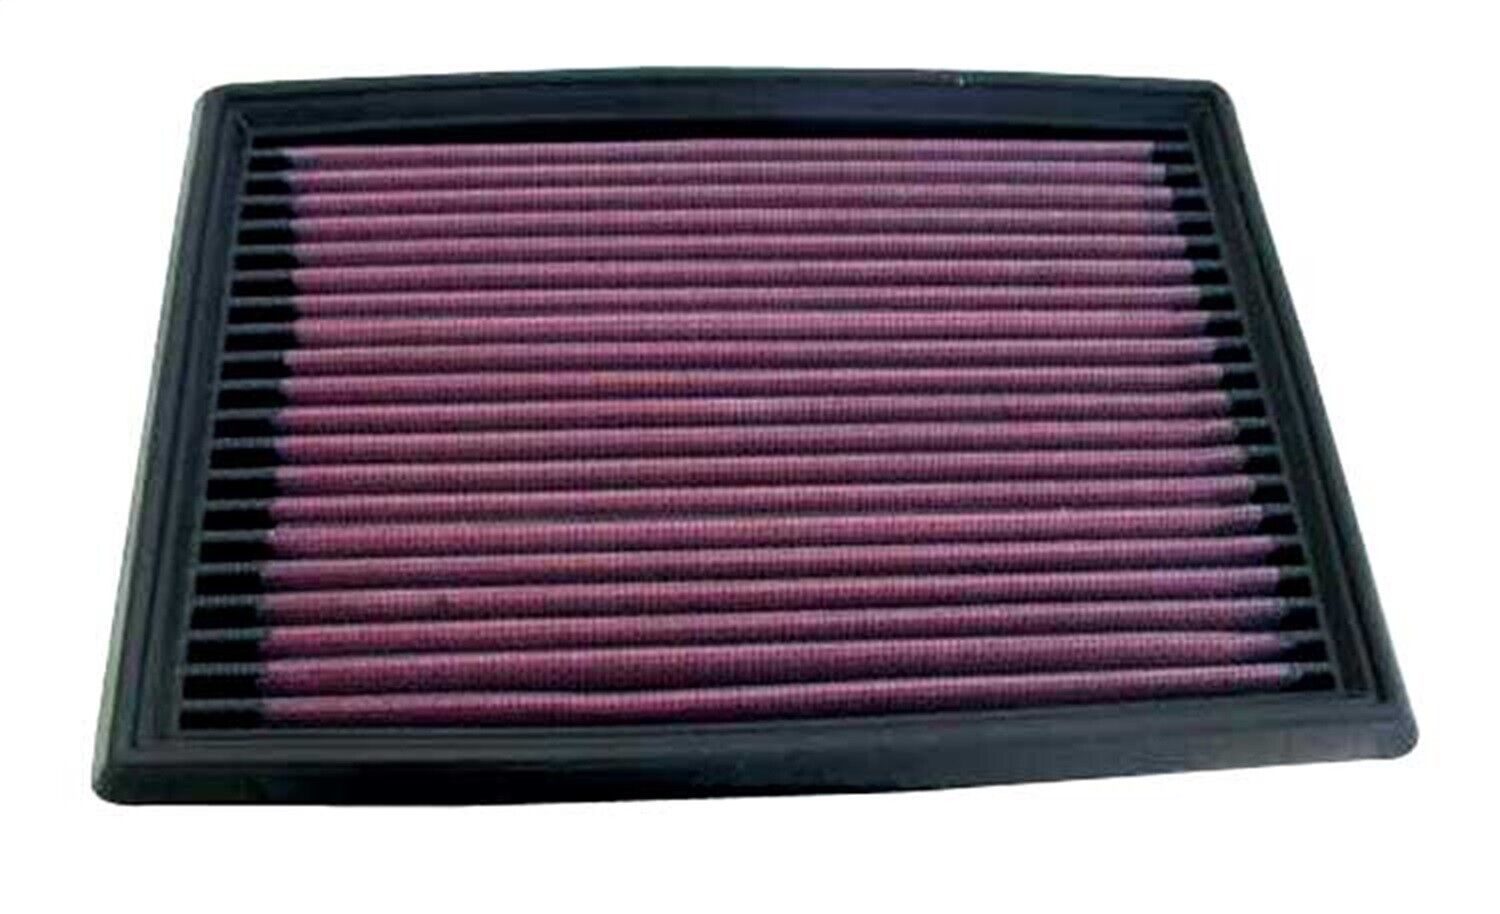 K&N Filters 33-2036 Air Filter Fits 90-00 300ZX Civic